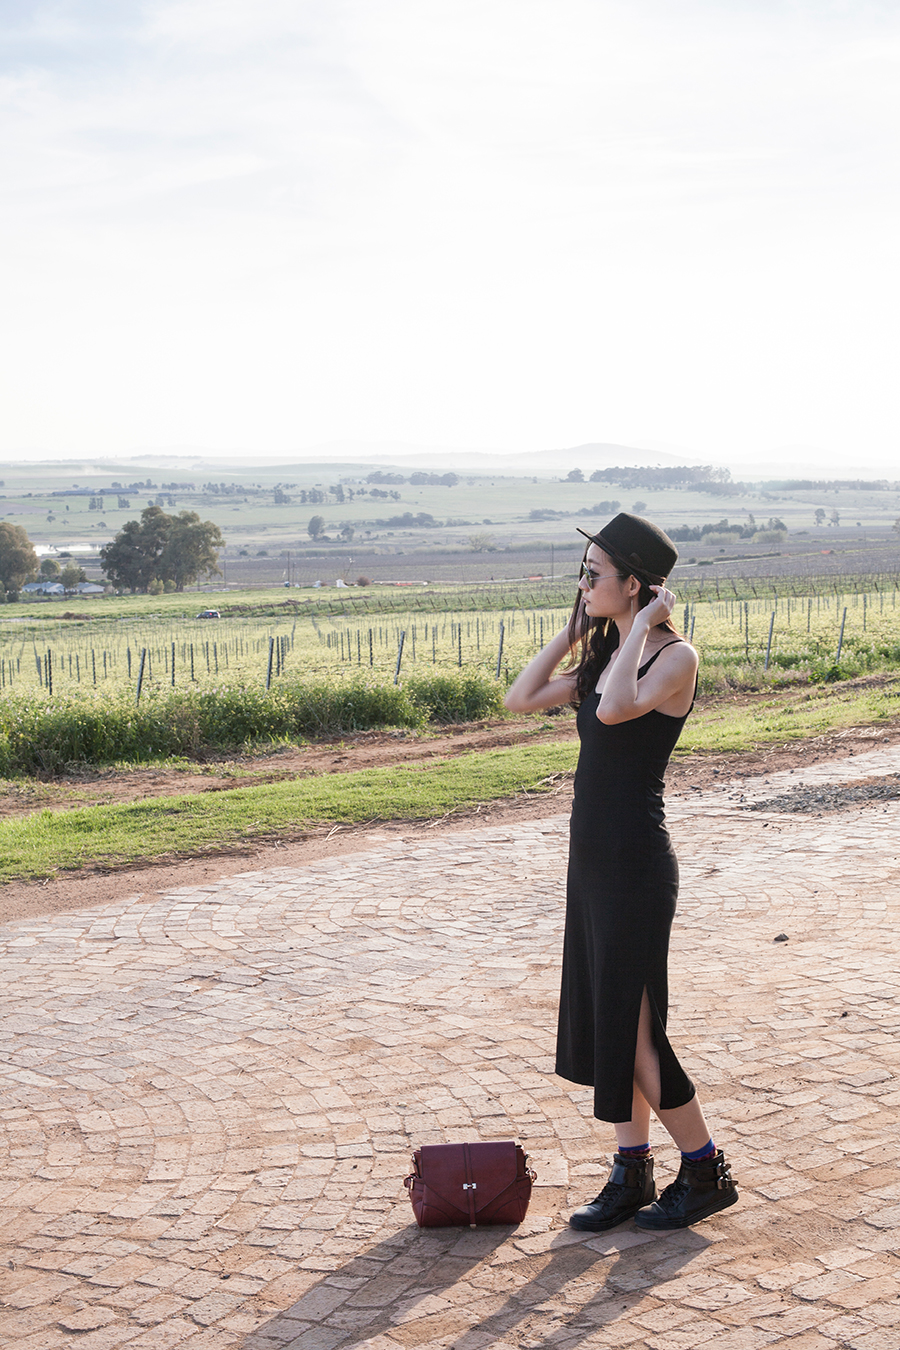 Outfit at Fairview Wine and Cheese, South Africa: Newdress black side slit dress, Dressin silver mirror sunglasses, Dressgal red satchel handbag, Stance warrior crew socks via Shopbop, Zalora PU black high top sneakers, Taobao black hat.